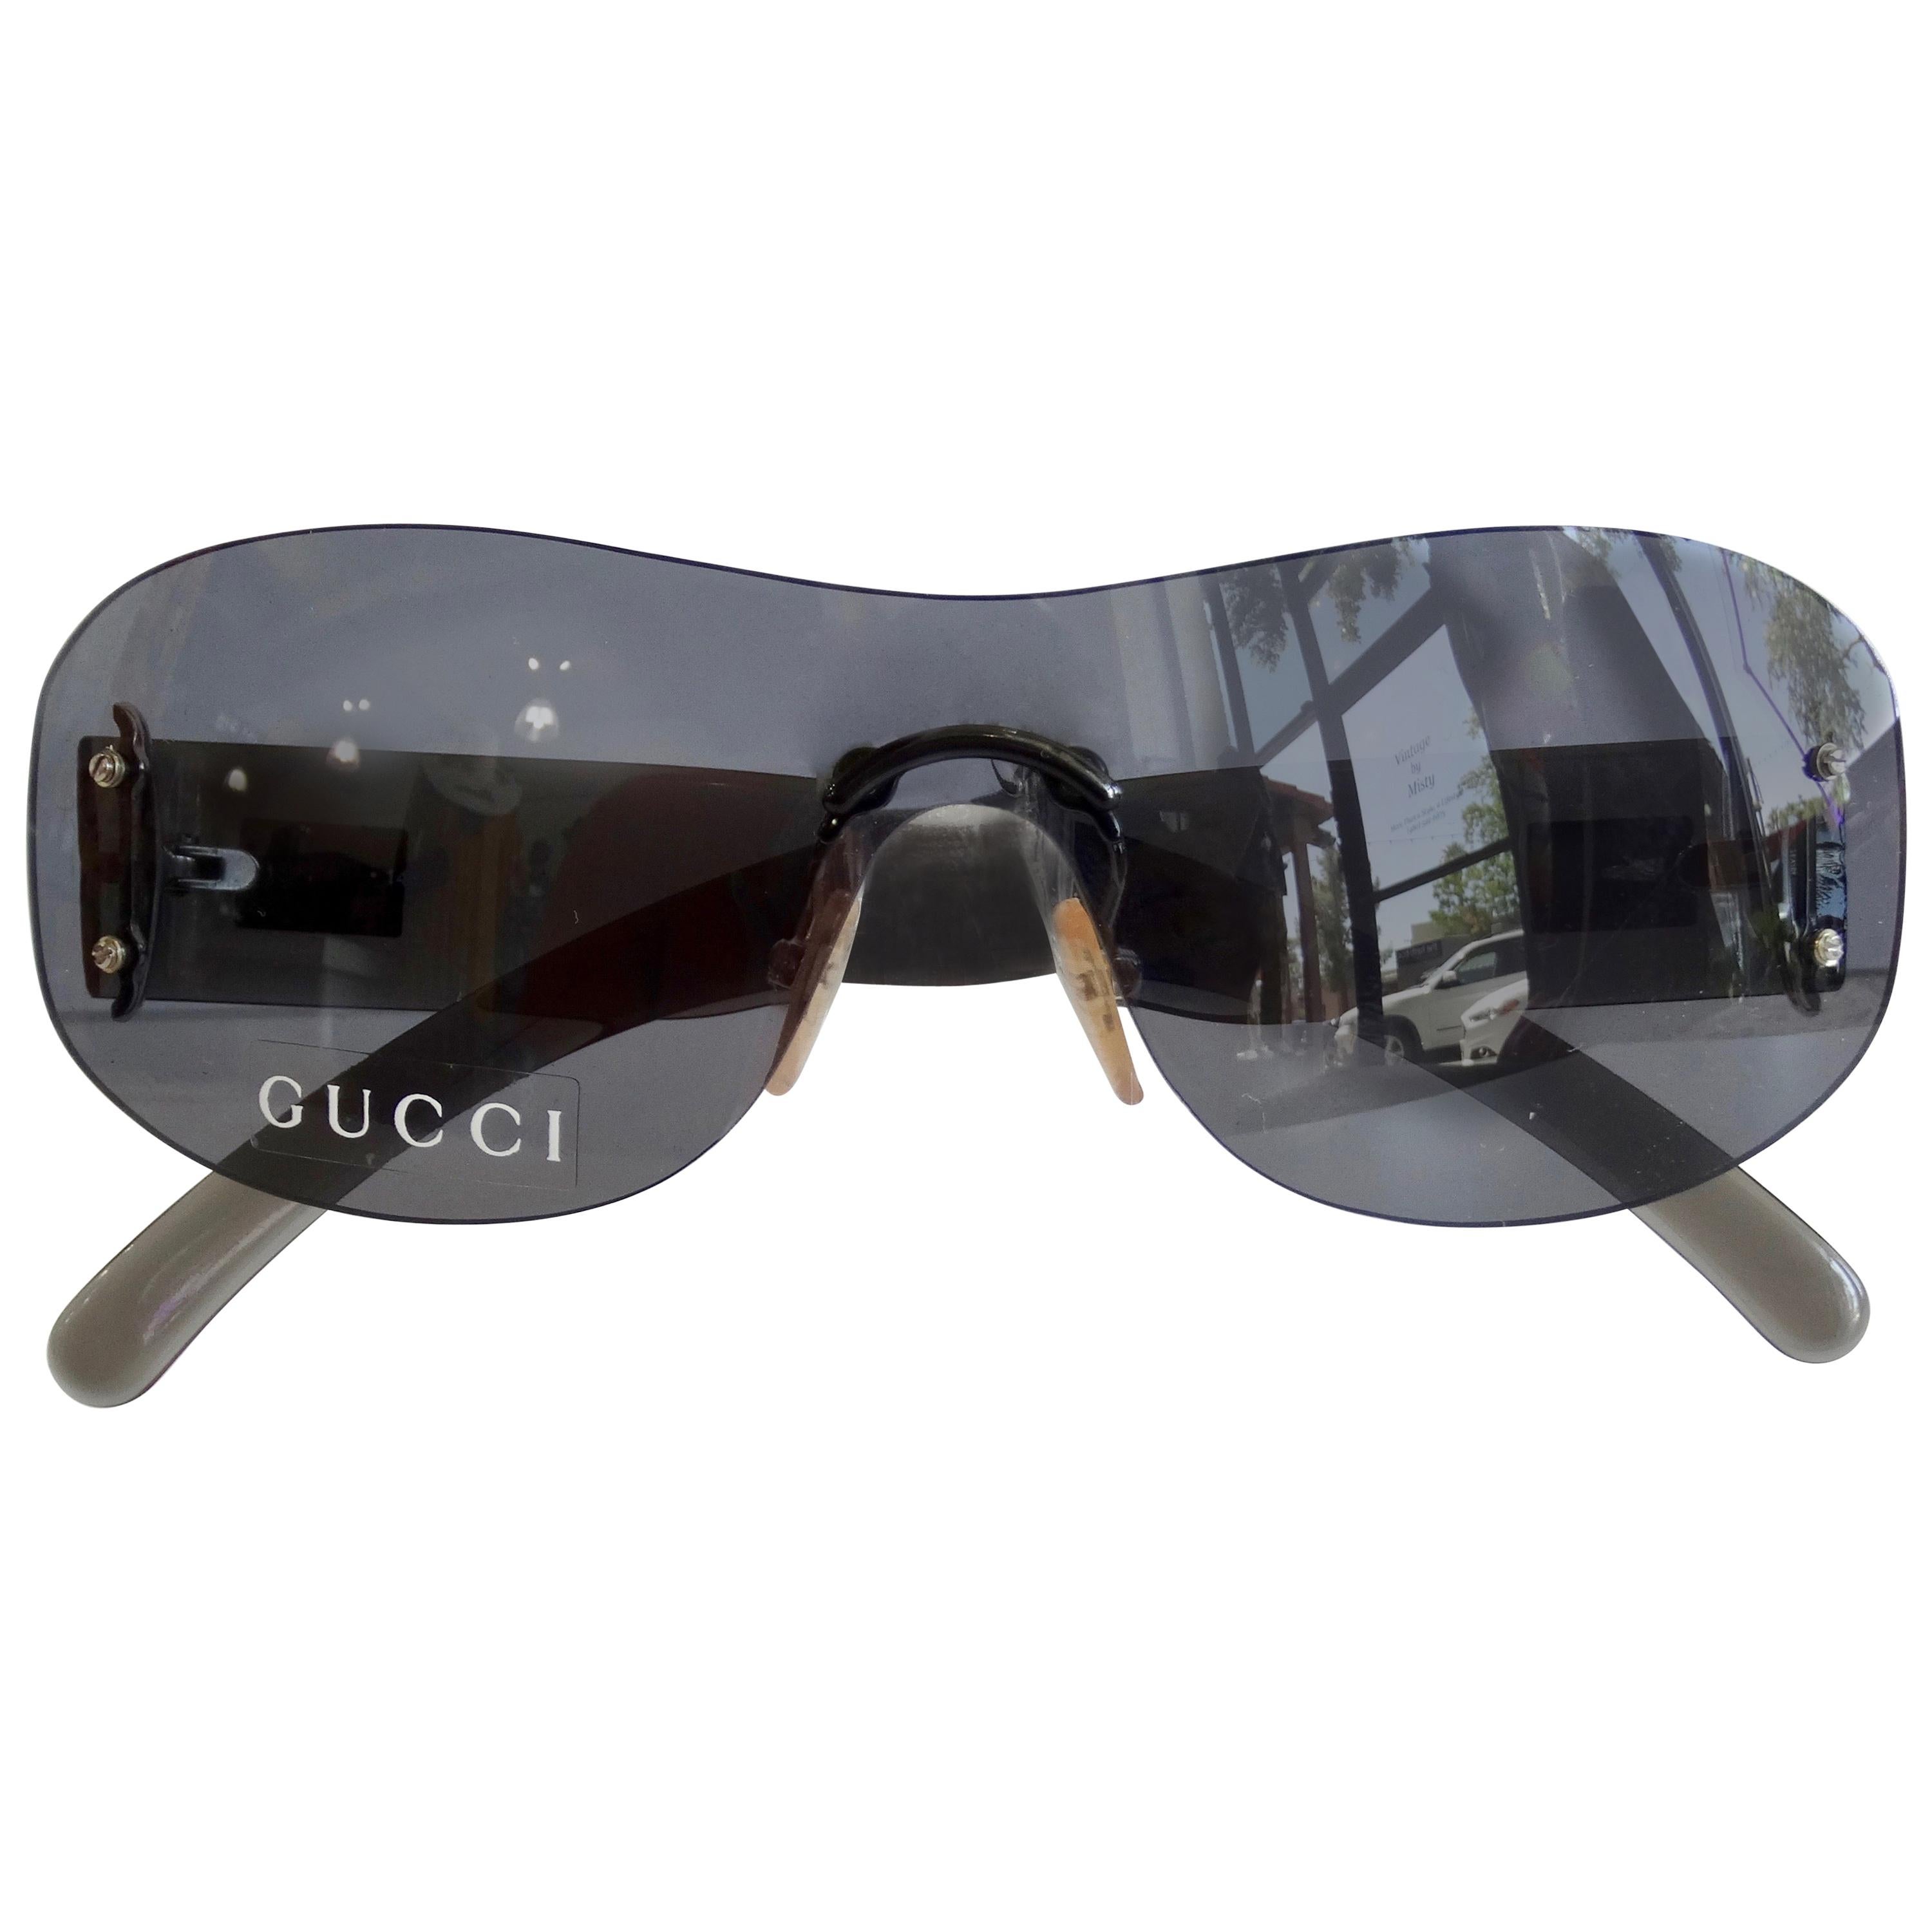 Vintage 90s Gucci Sunglasses - 4 For Sale on 1stDibs | 90s gucci